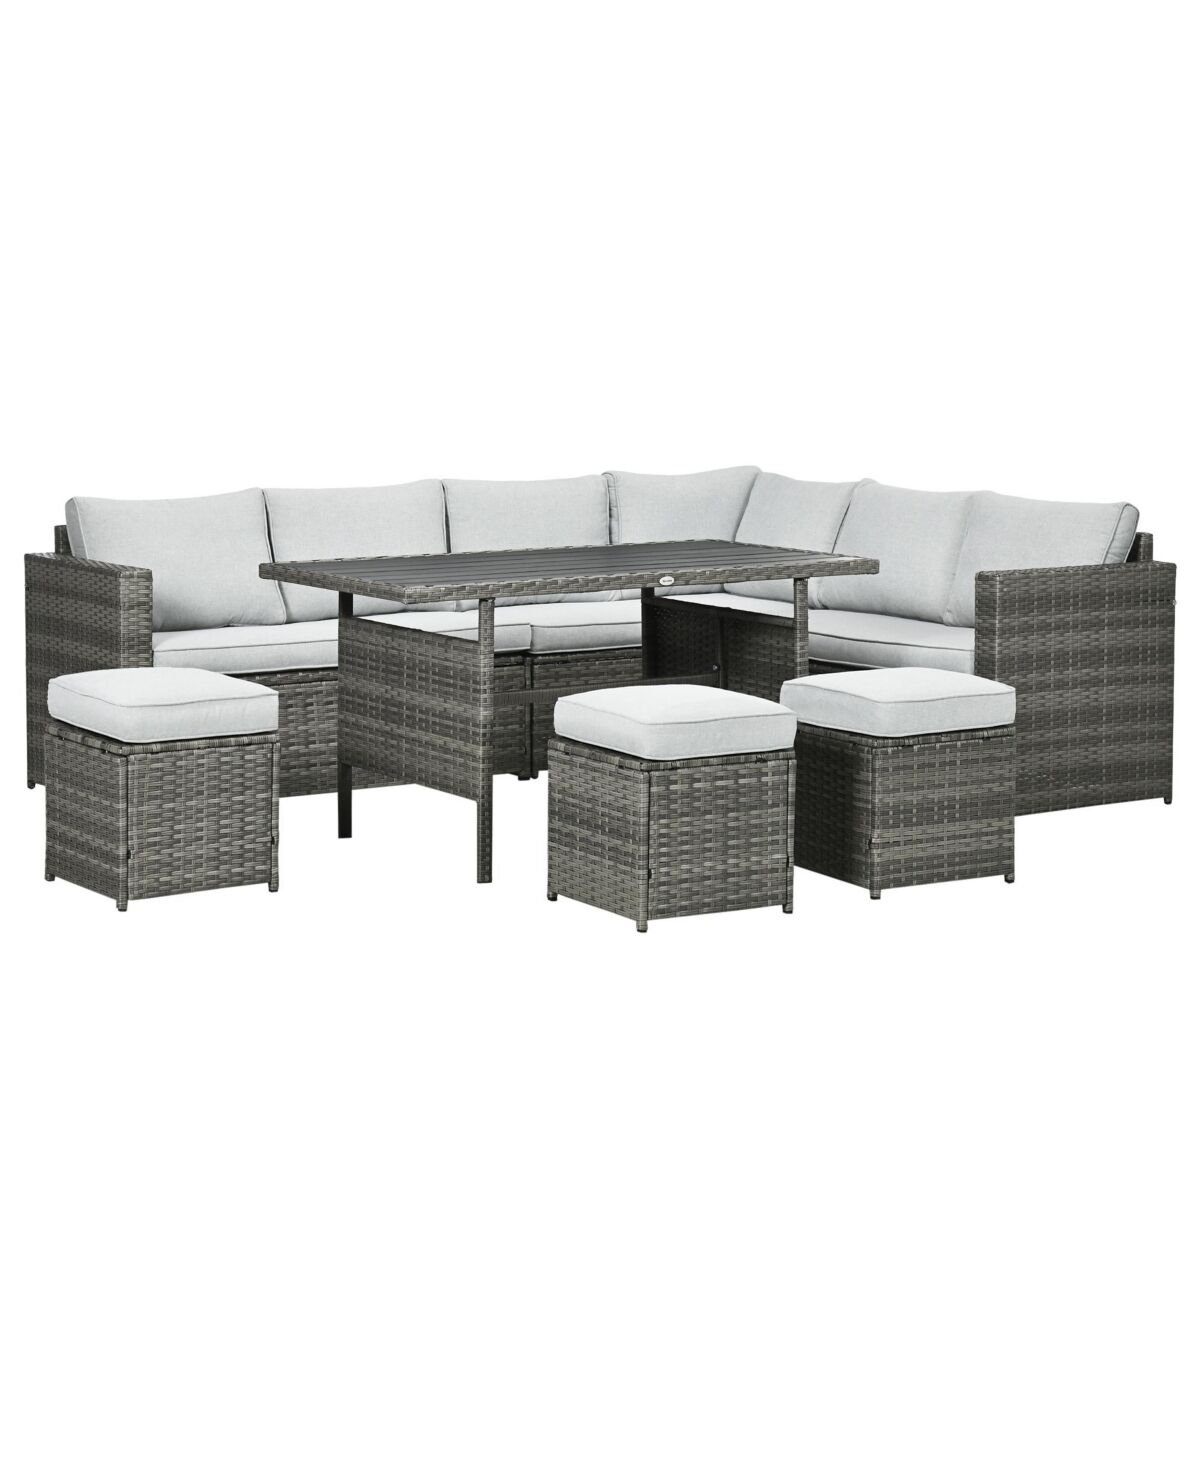 Outsunny 7 Piece Patio Furniture Set, Outdoor L-Shaped Sectional Sofa with 3 Loveseats, 3 Ottoman Chairs, Outside Conversation Set with Dining Table,